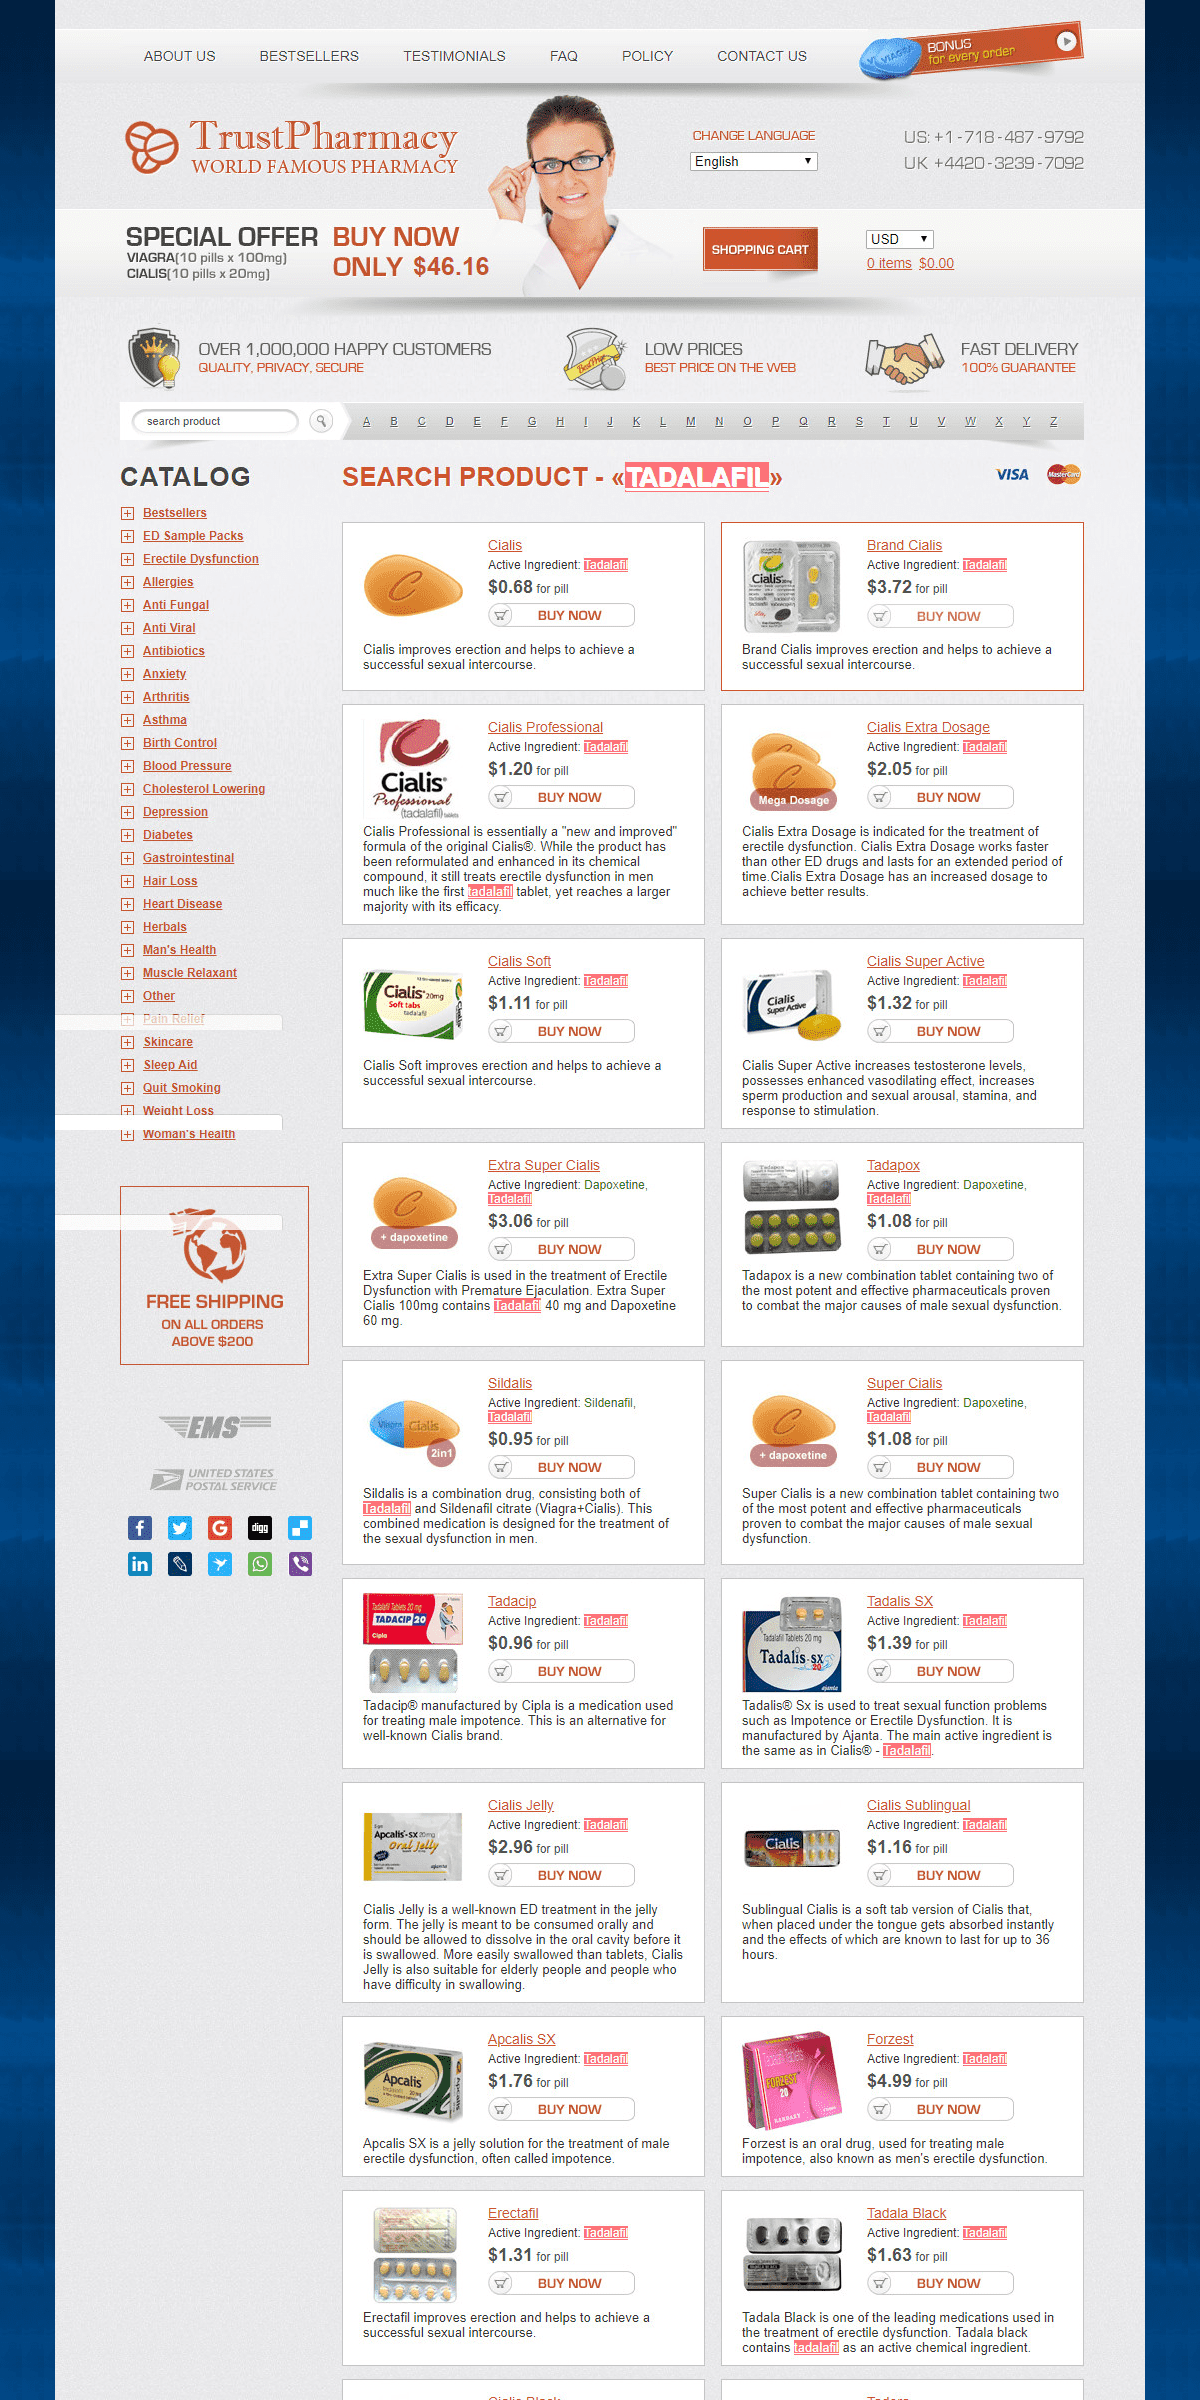 A complete backup of lapizmoon.com